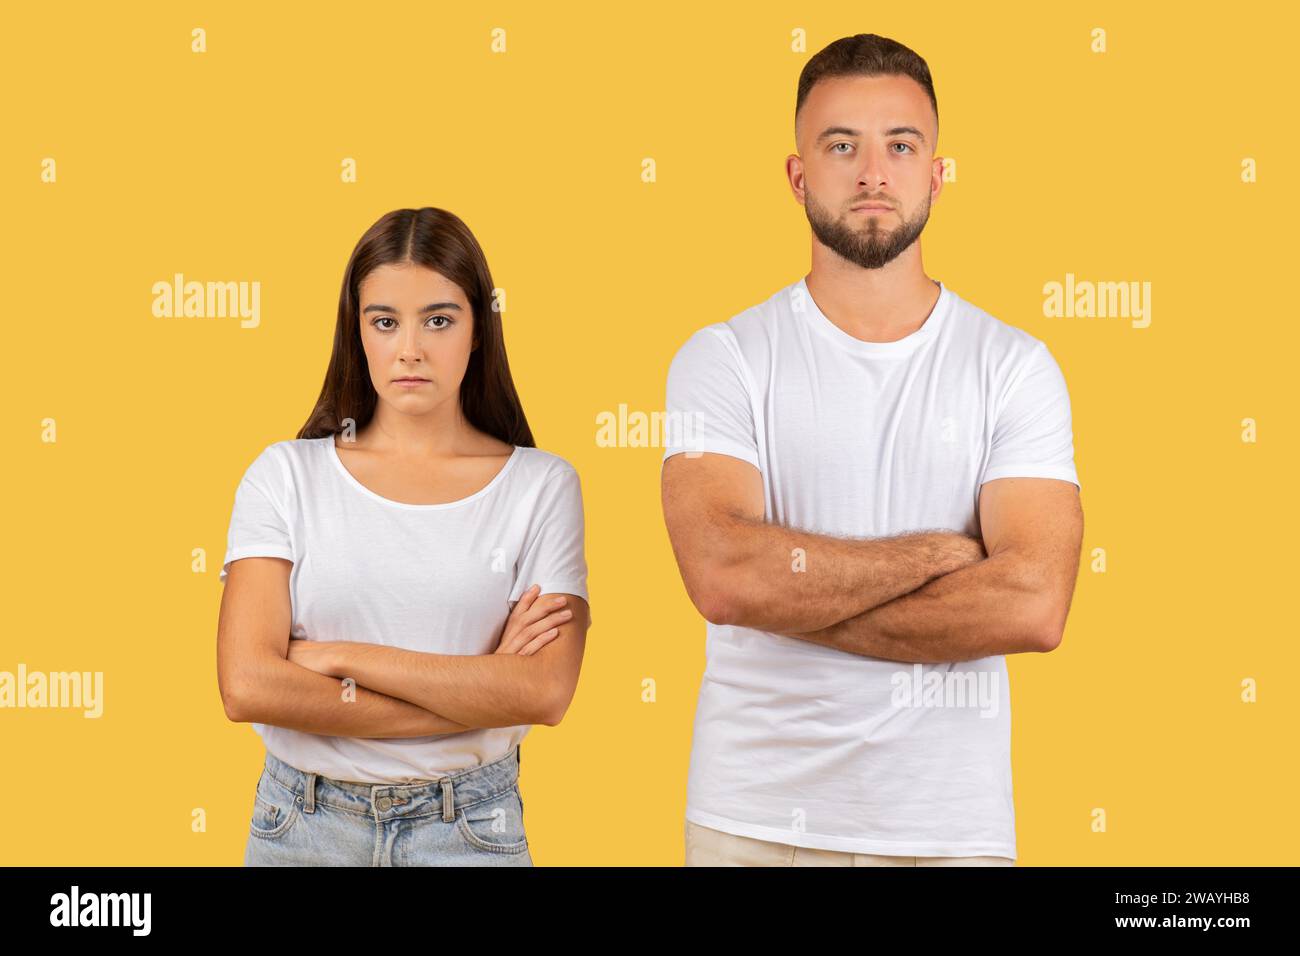 Stern-faced young couple with arms crossed in white t-shirts, exuding a strong sense of disagreement Stock Photo